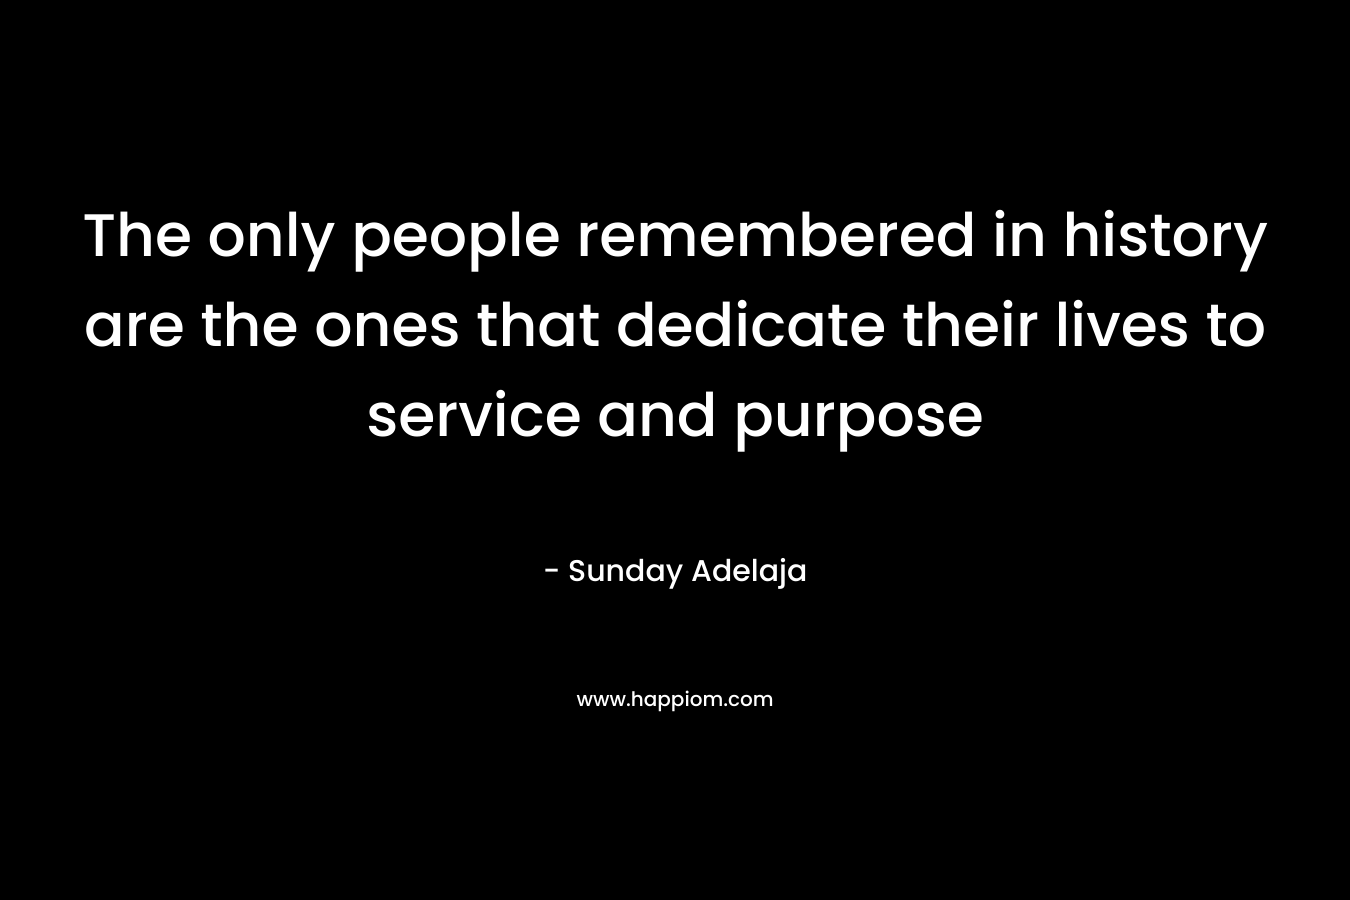 The only people remembered in history are the ones that dedicate their lives to service and purpose